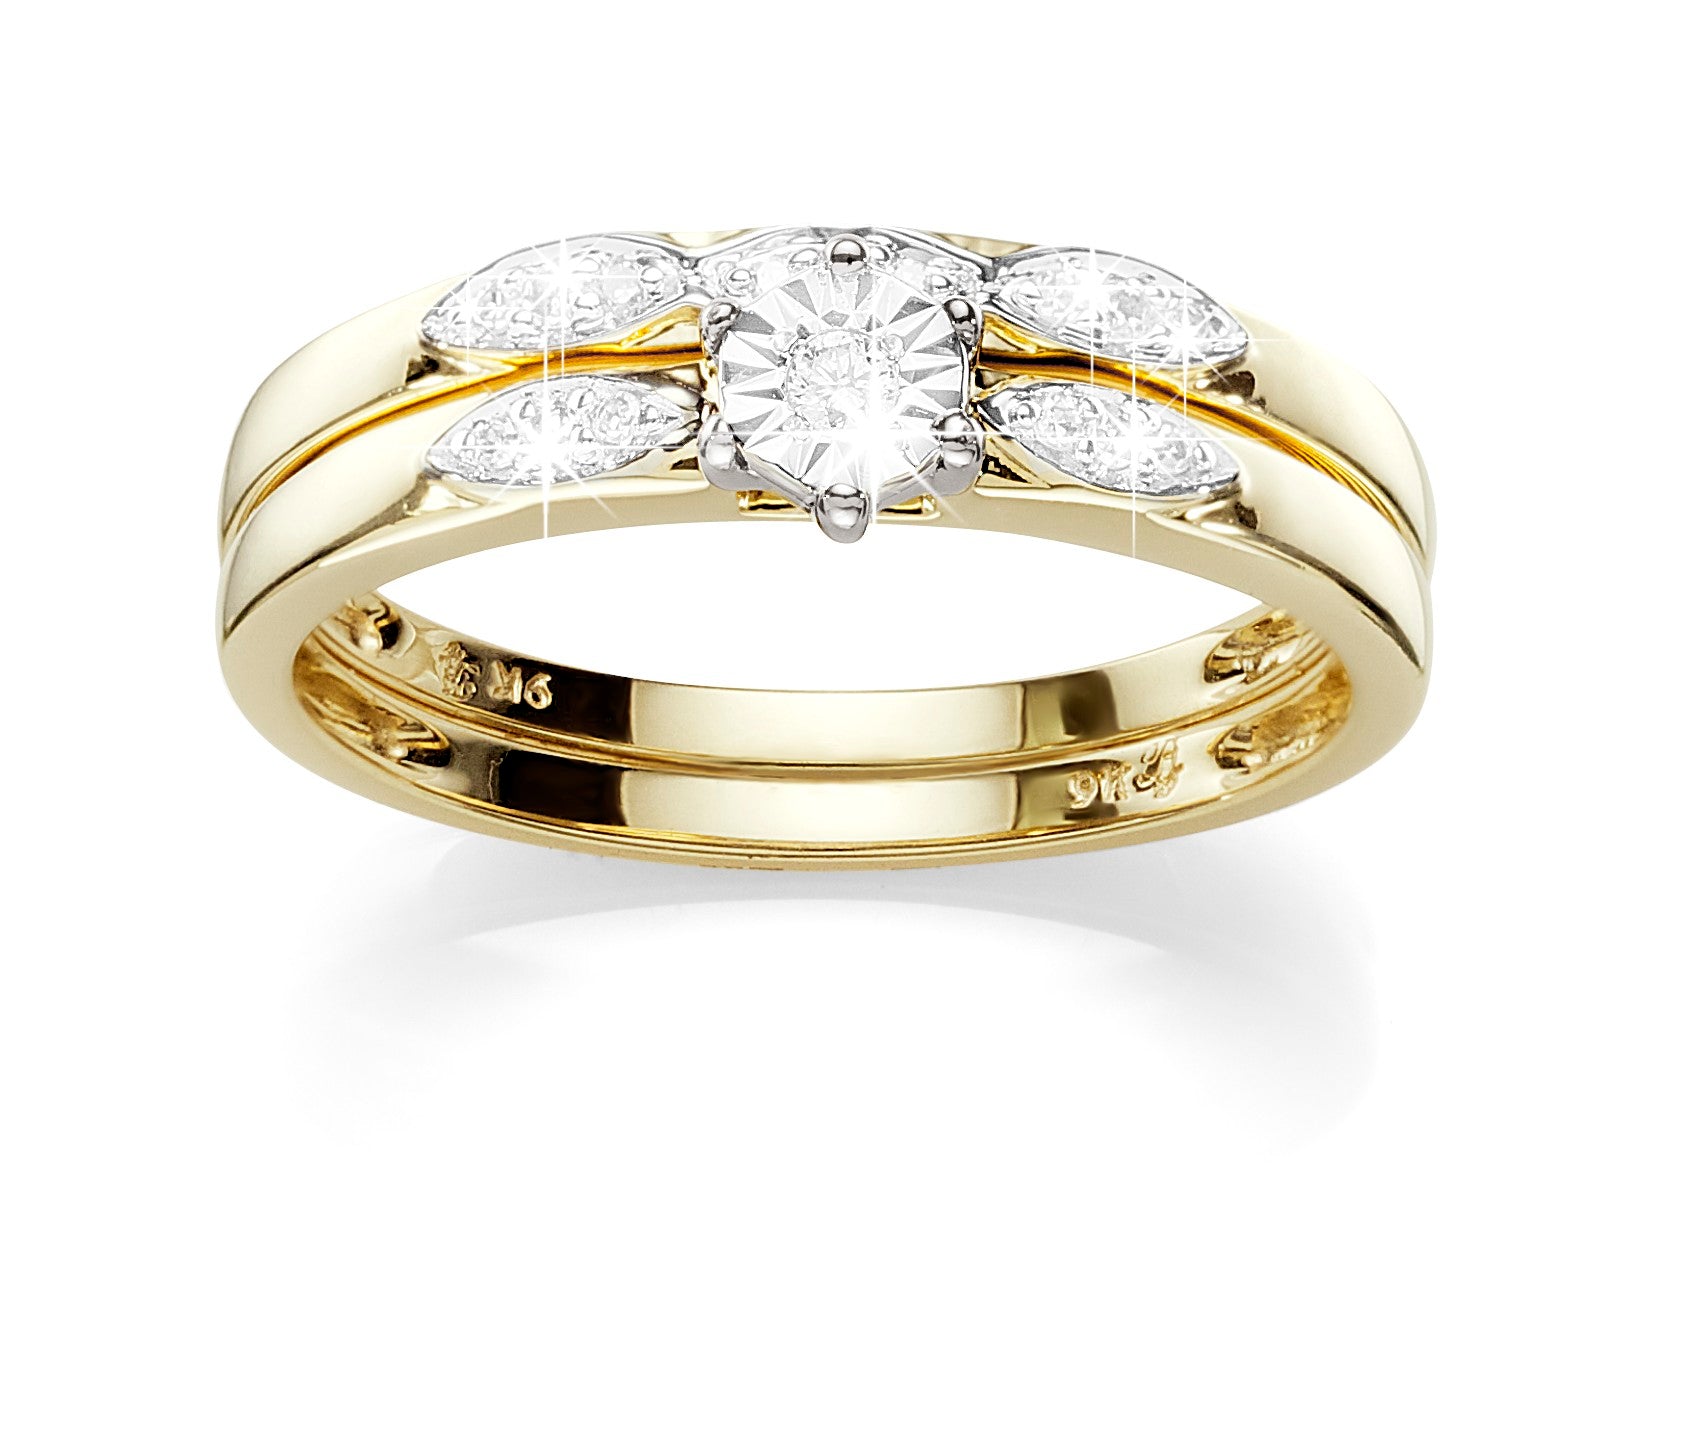 9ct gold diamond ring with matching band